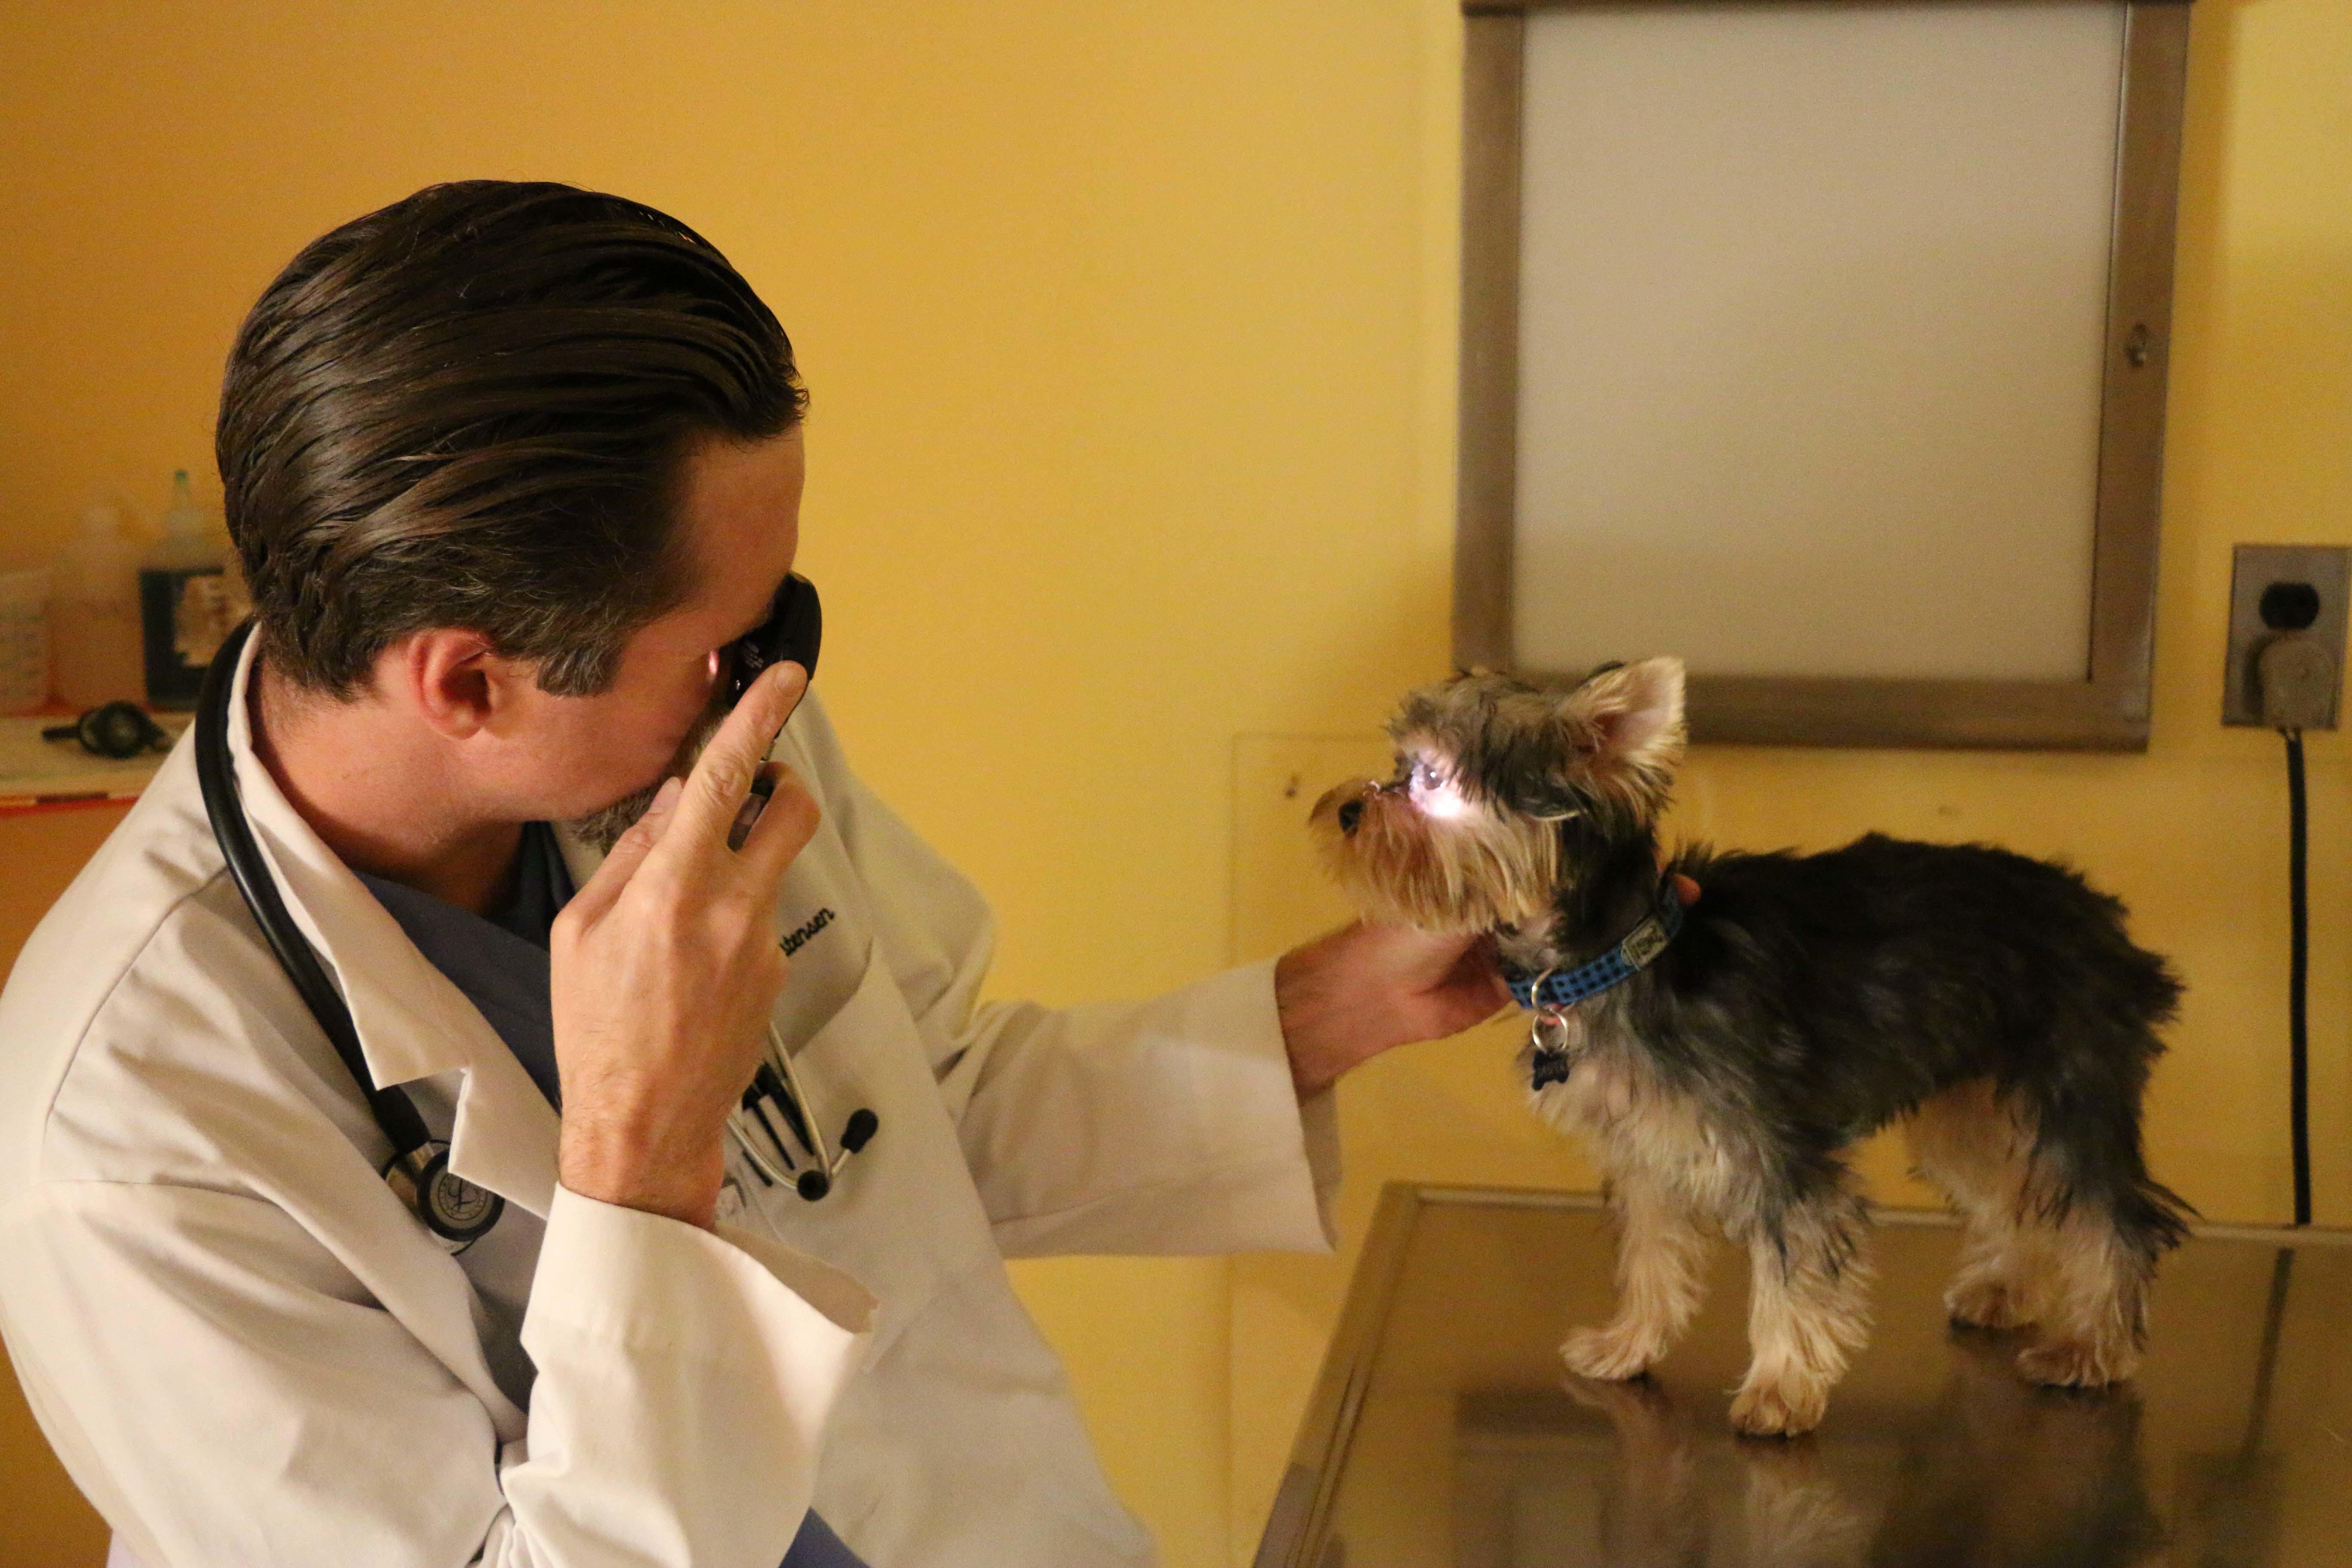 Using an otoscope, Dr. Christensen checks to make sure this dog's eyes are clear, white, and bright.